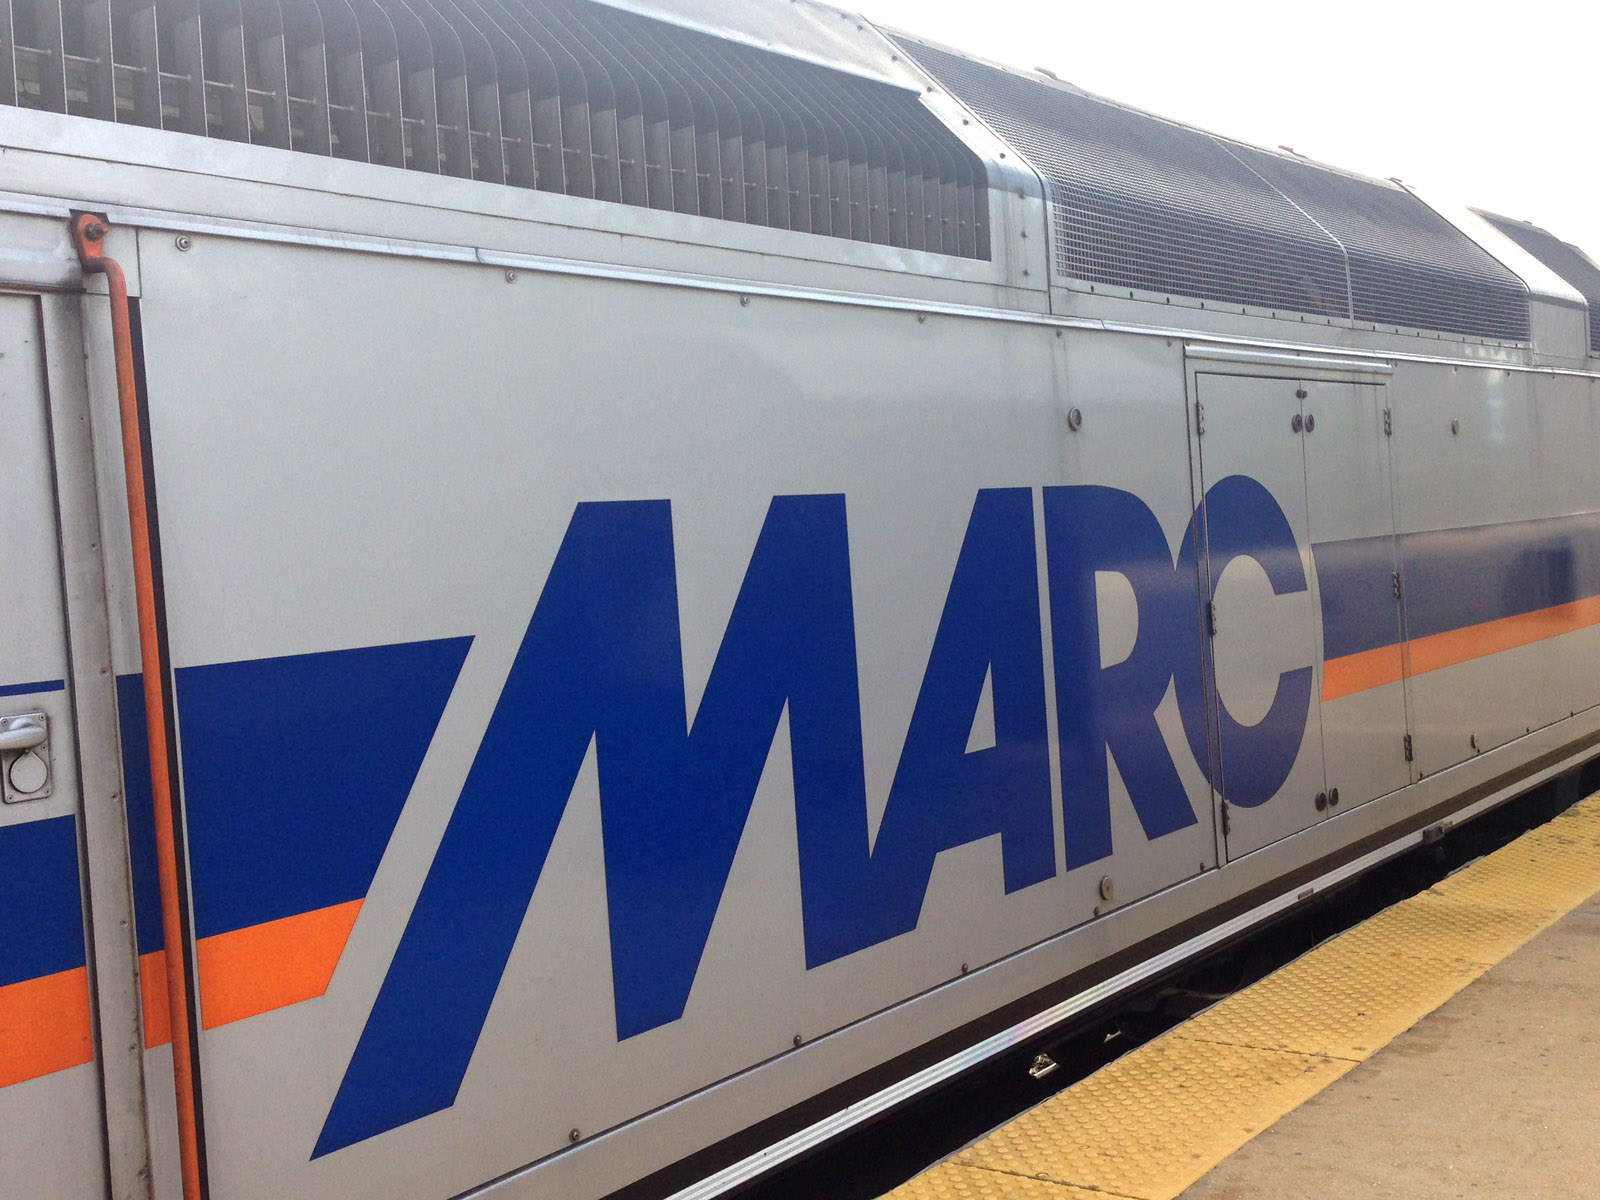 Track work forces schedule changes for MARC, Amtrak